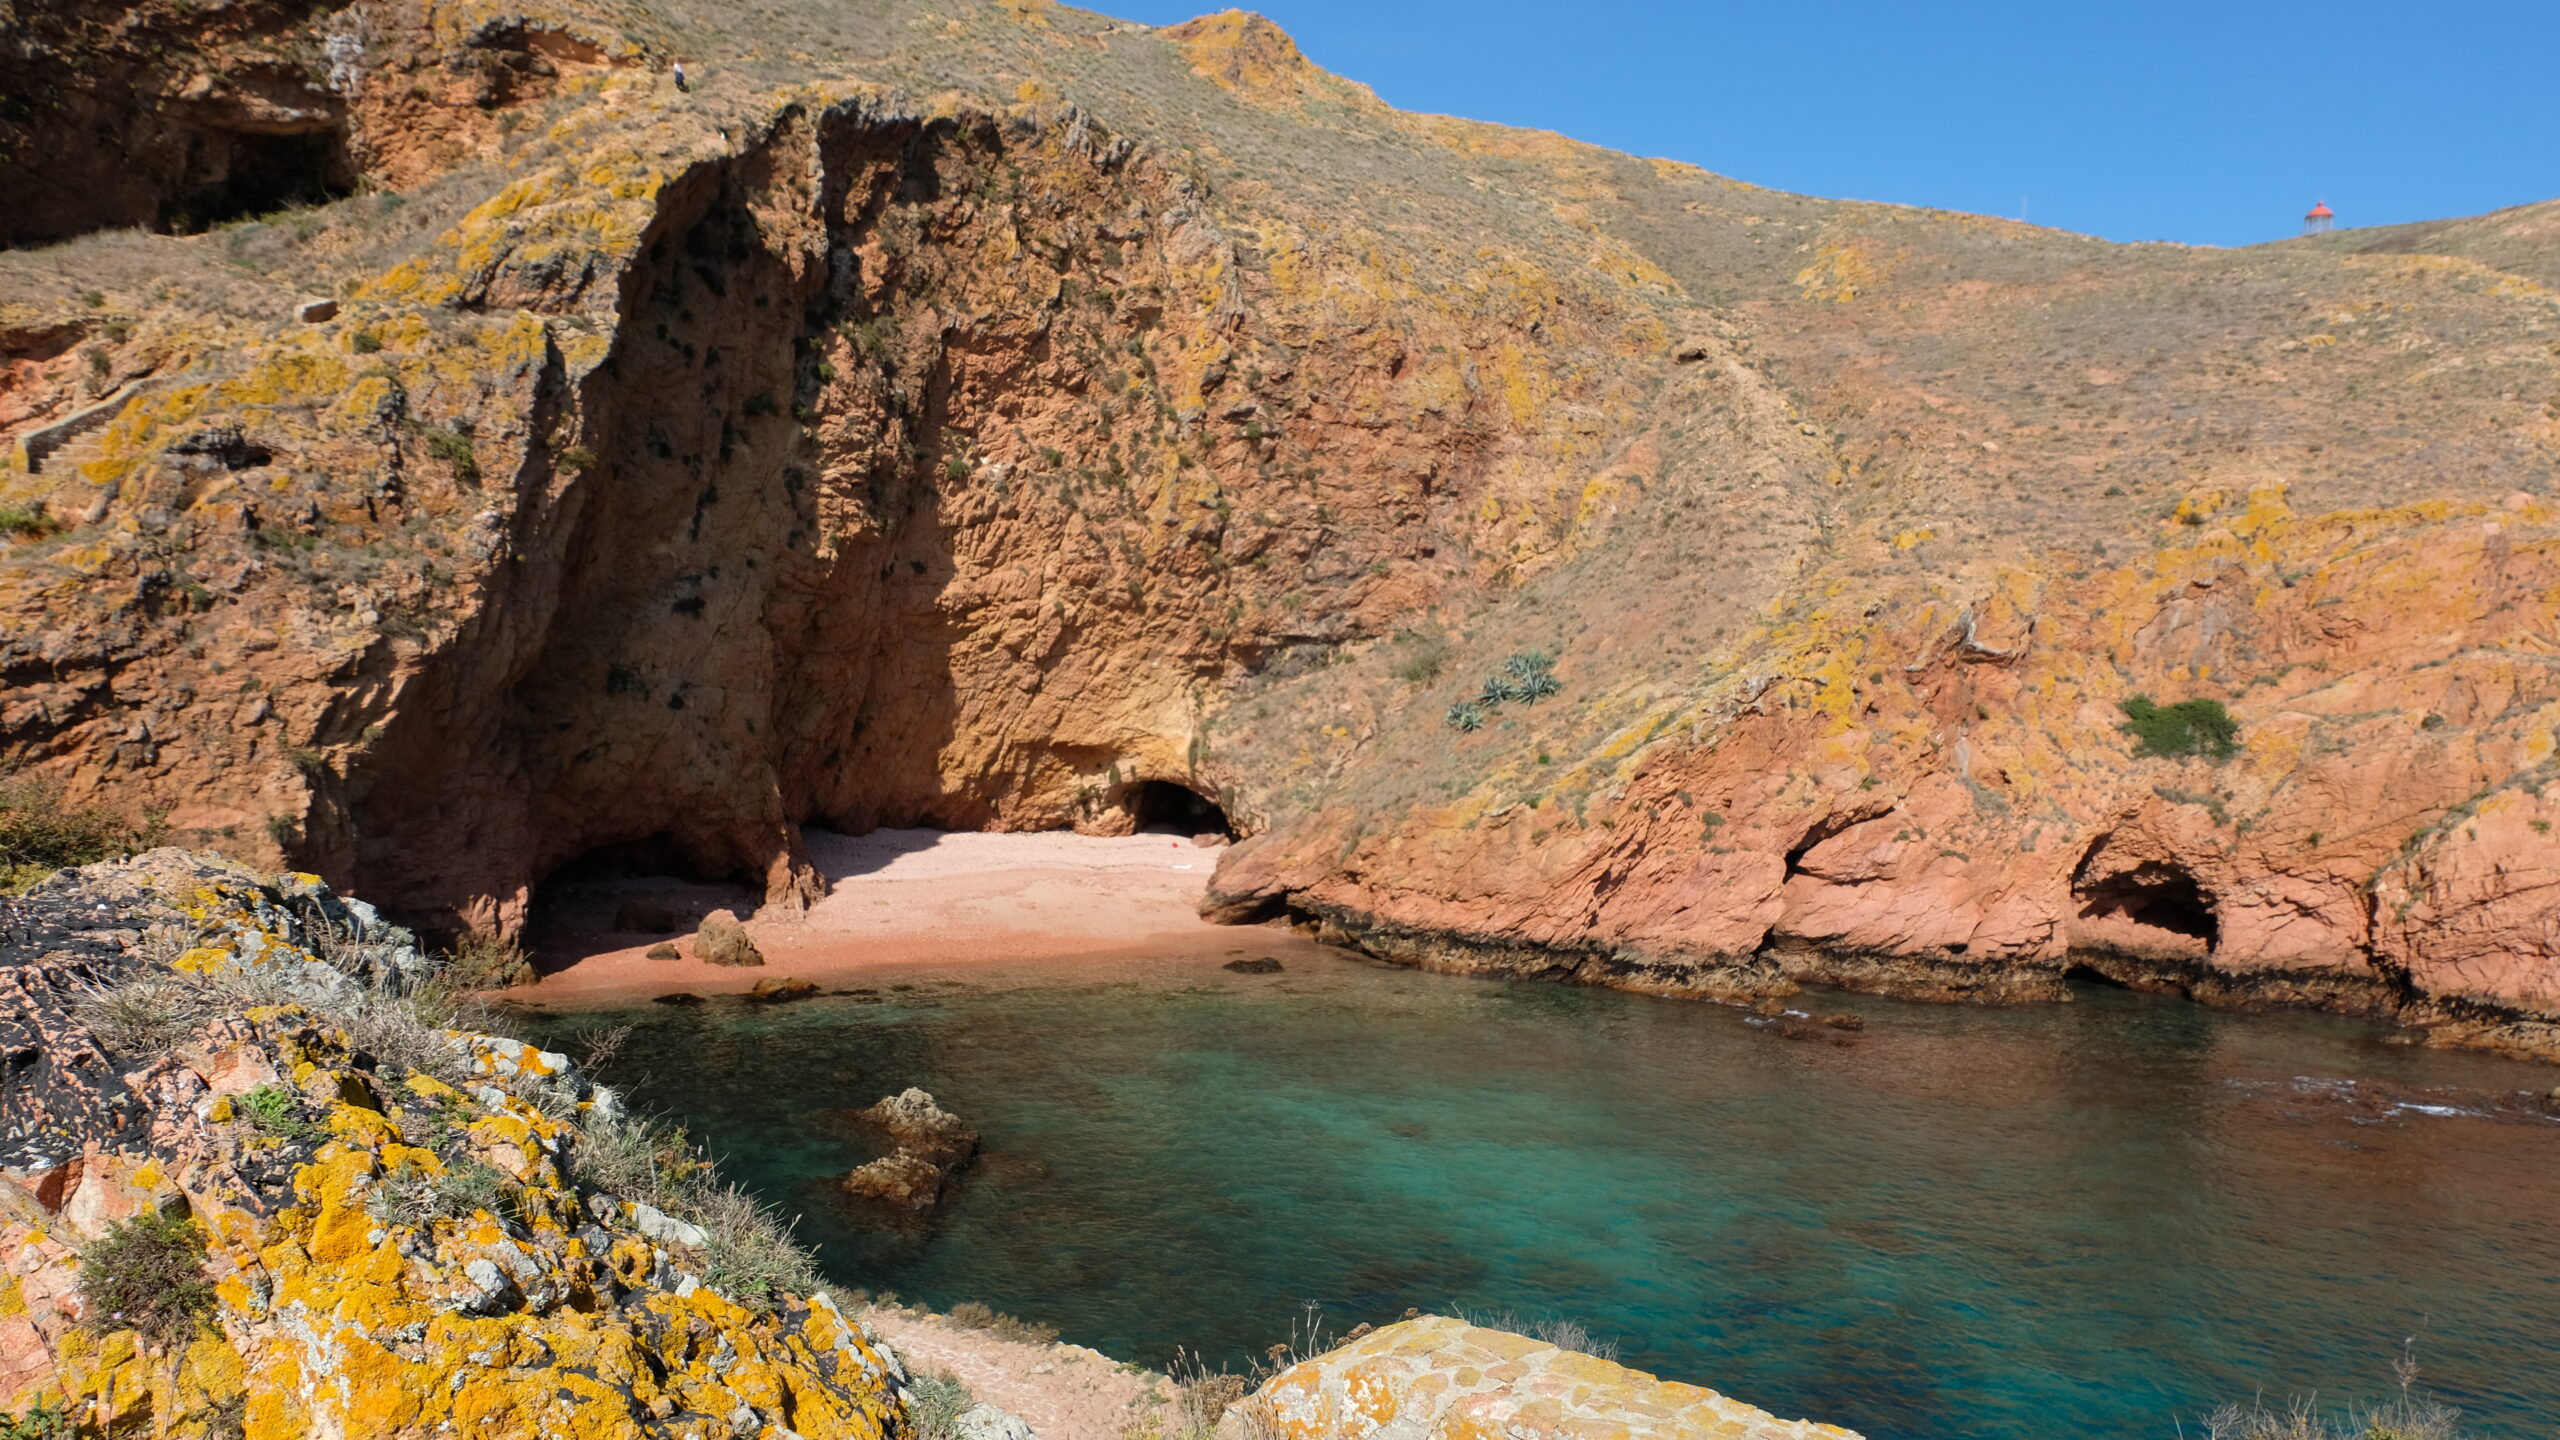 Berlenga is known for geological formations including caves.